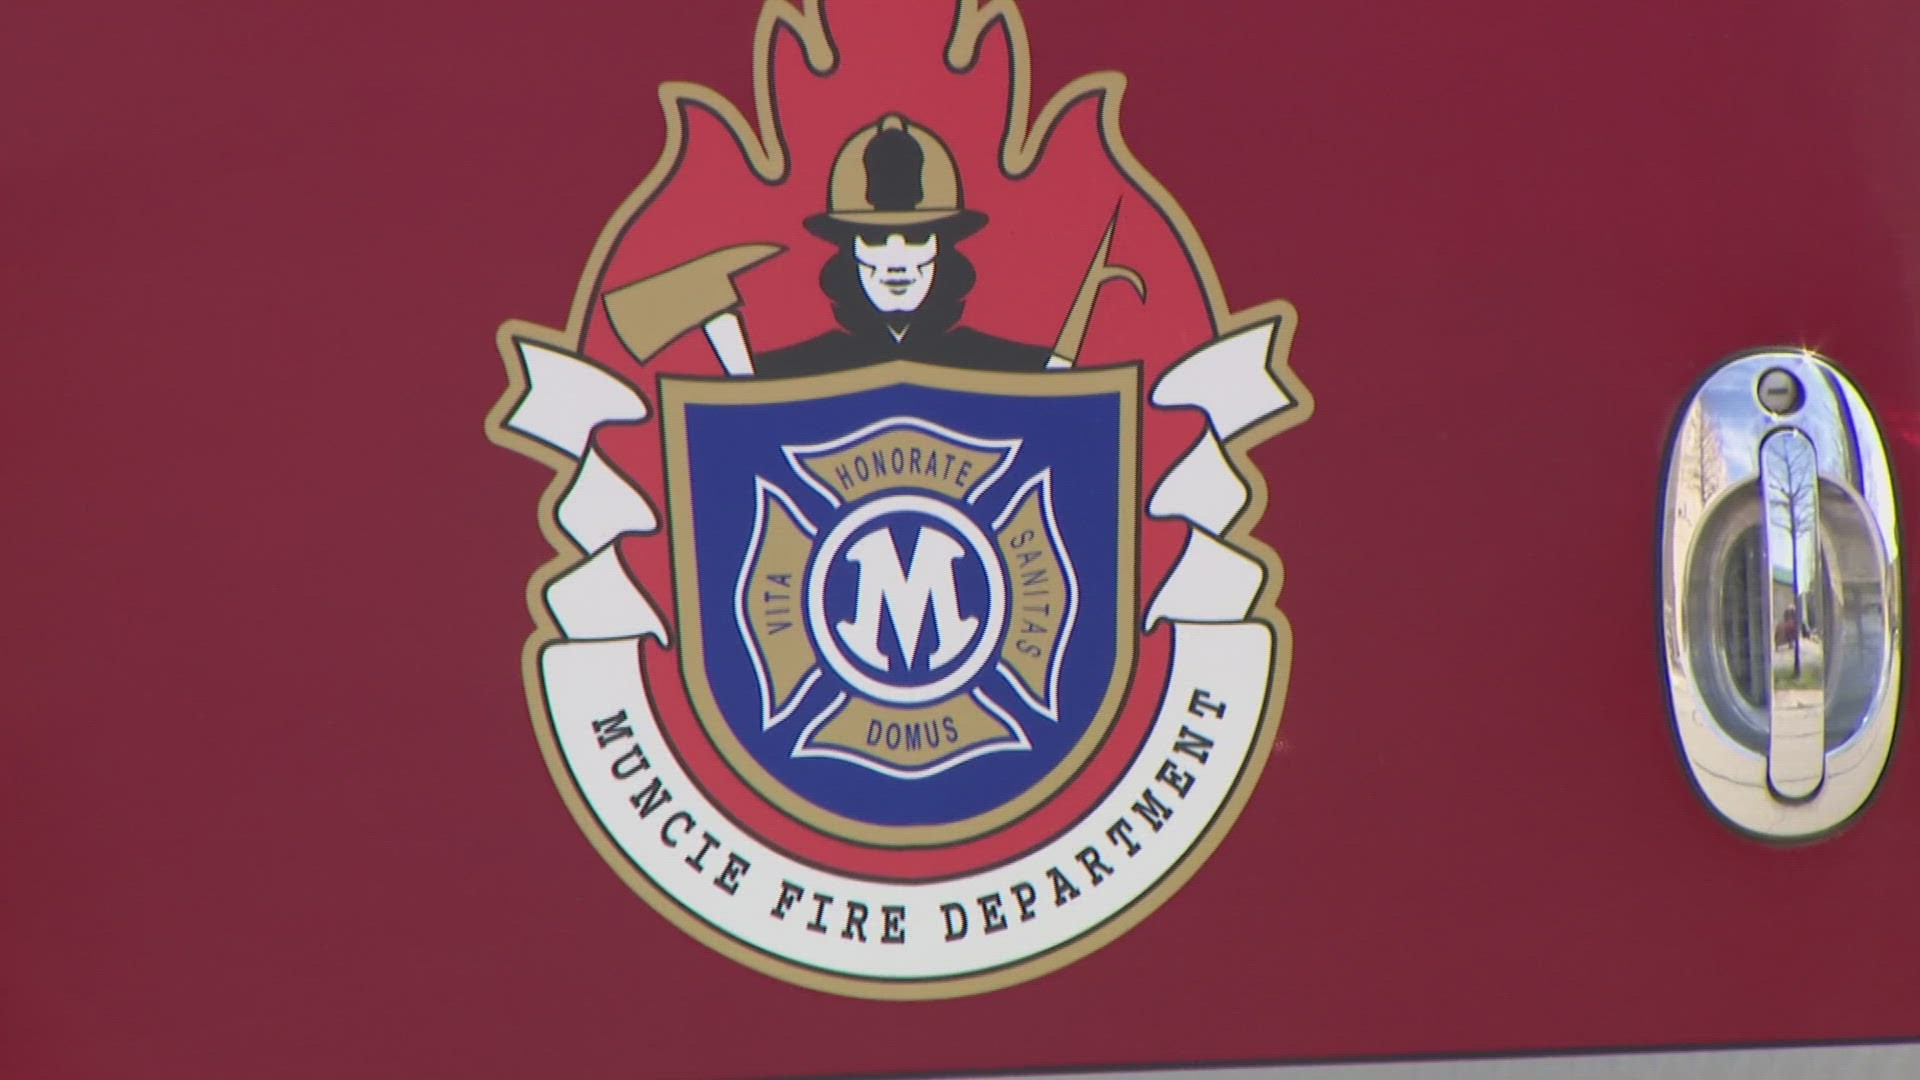 The Muncie Fire Department and its emergency medical service are under intense scrutiny following allegations of systemic cheating that have rocked the department.